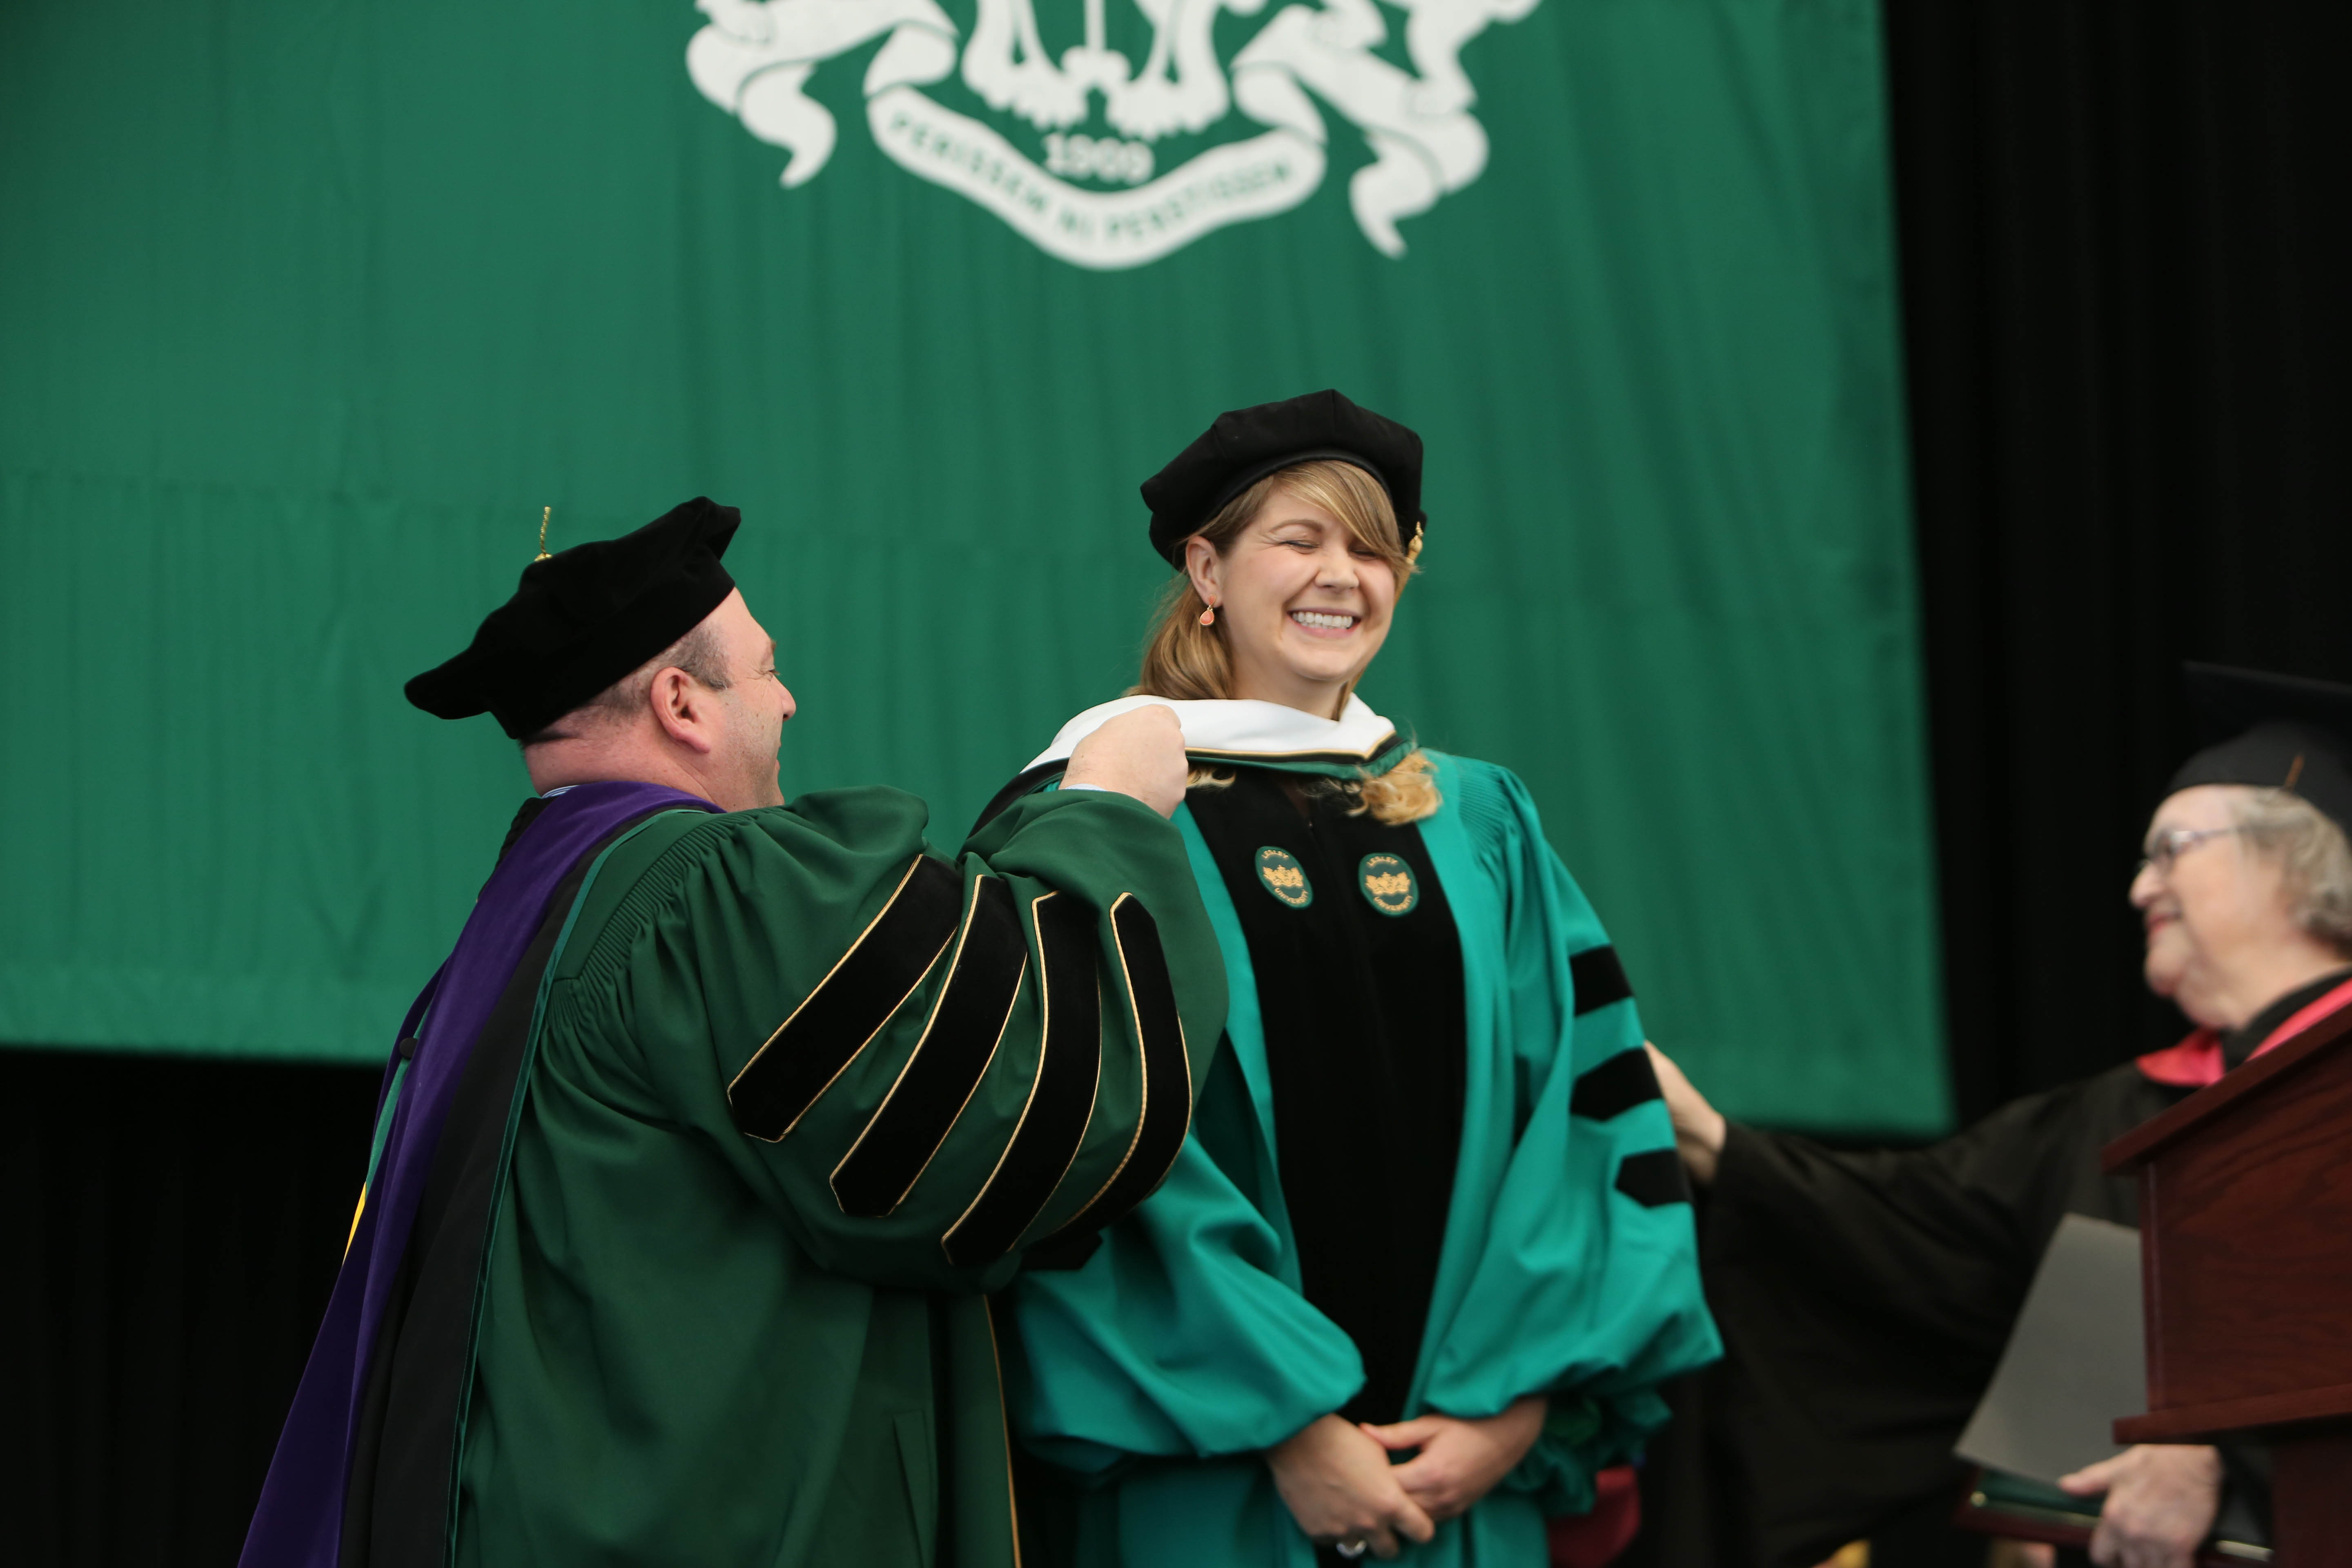 National Teacher of the Year Sydney Chaffee receives her honorary degree at commencement.